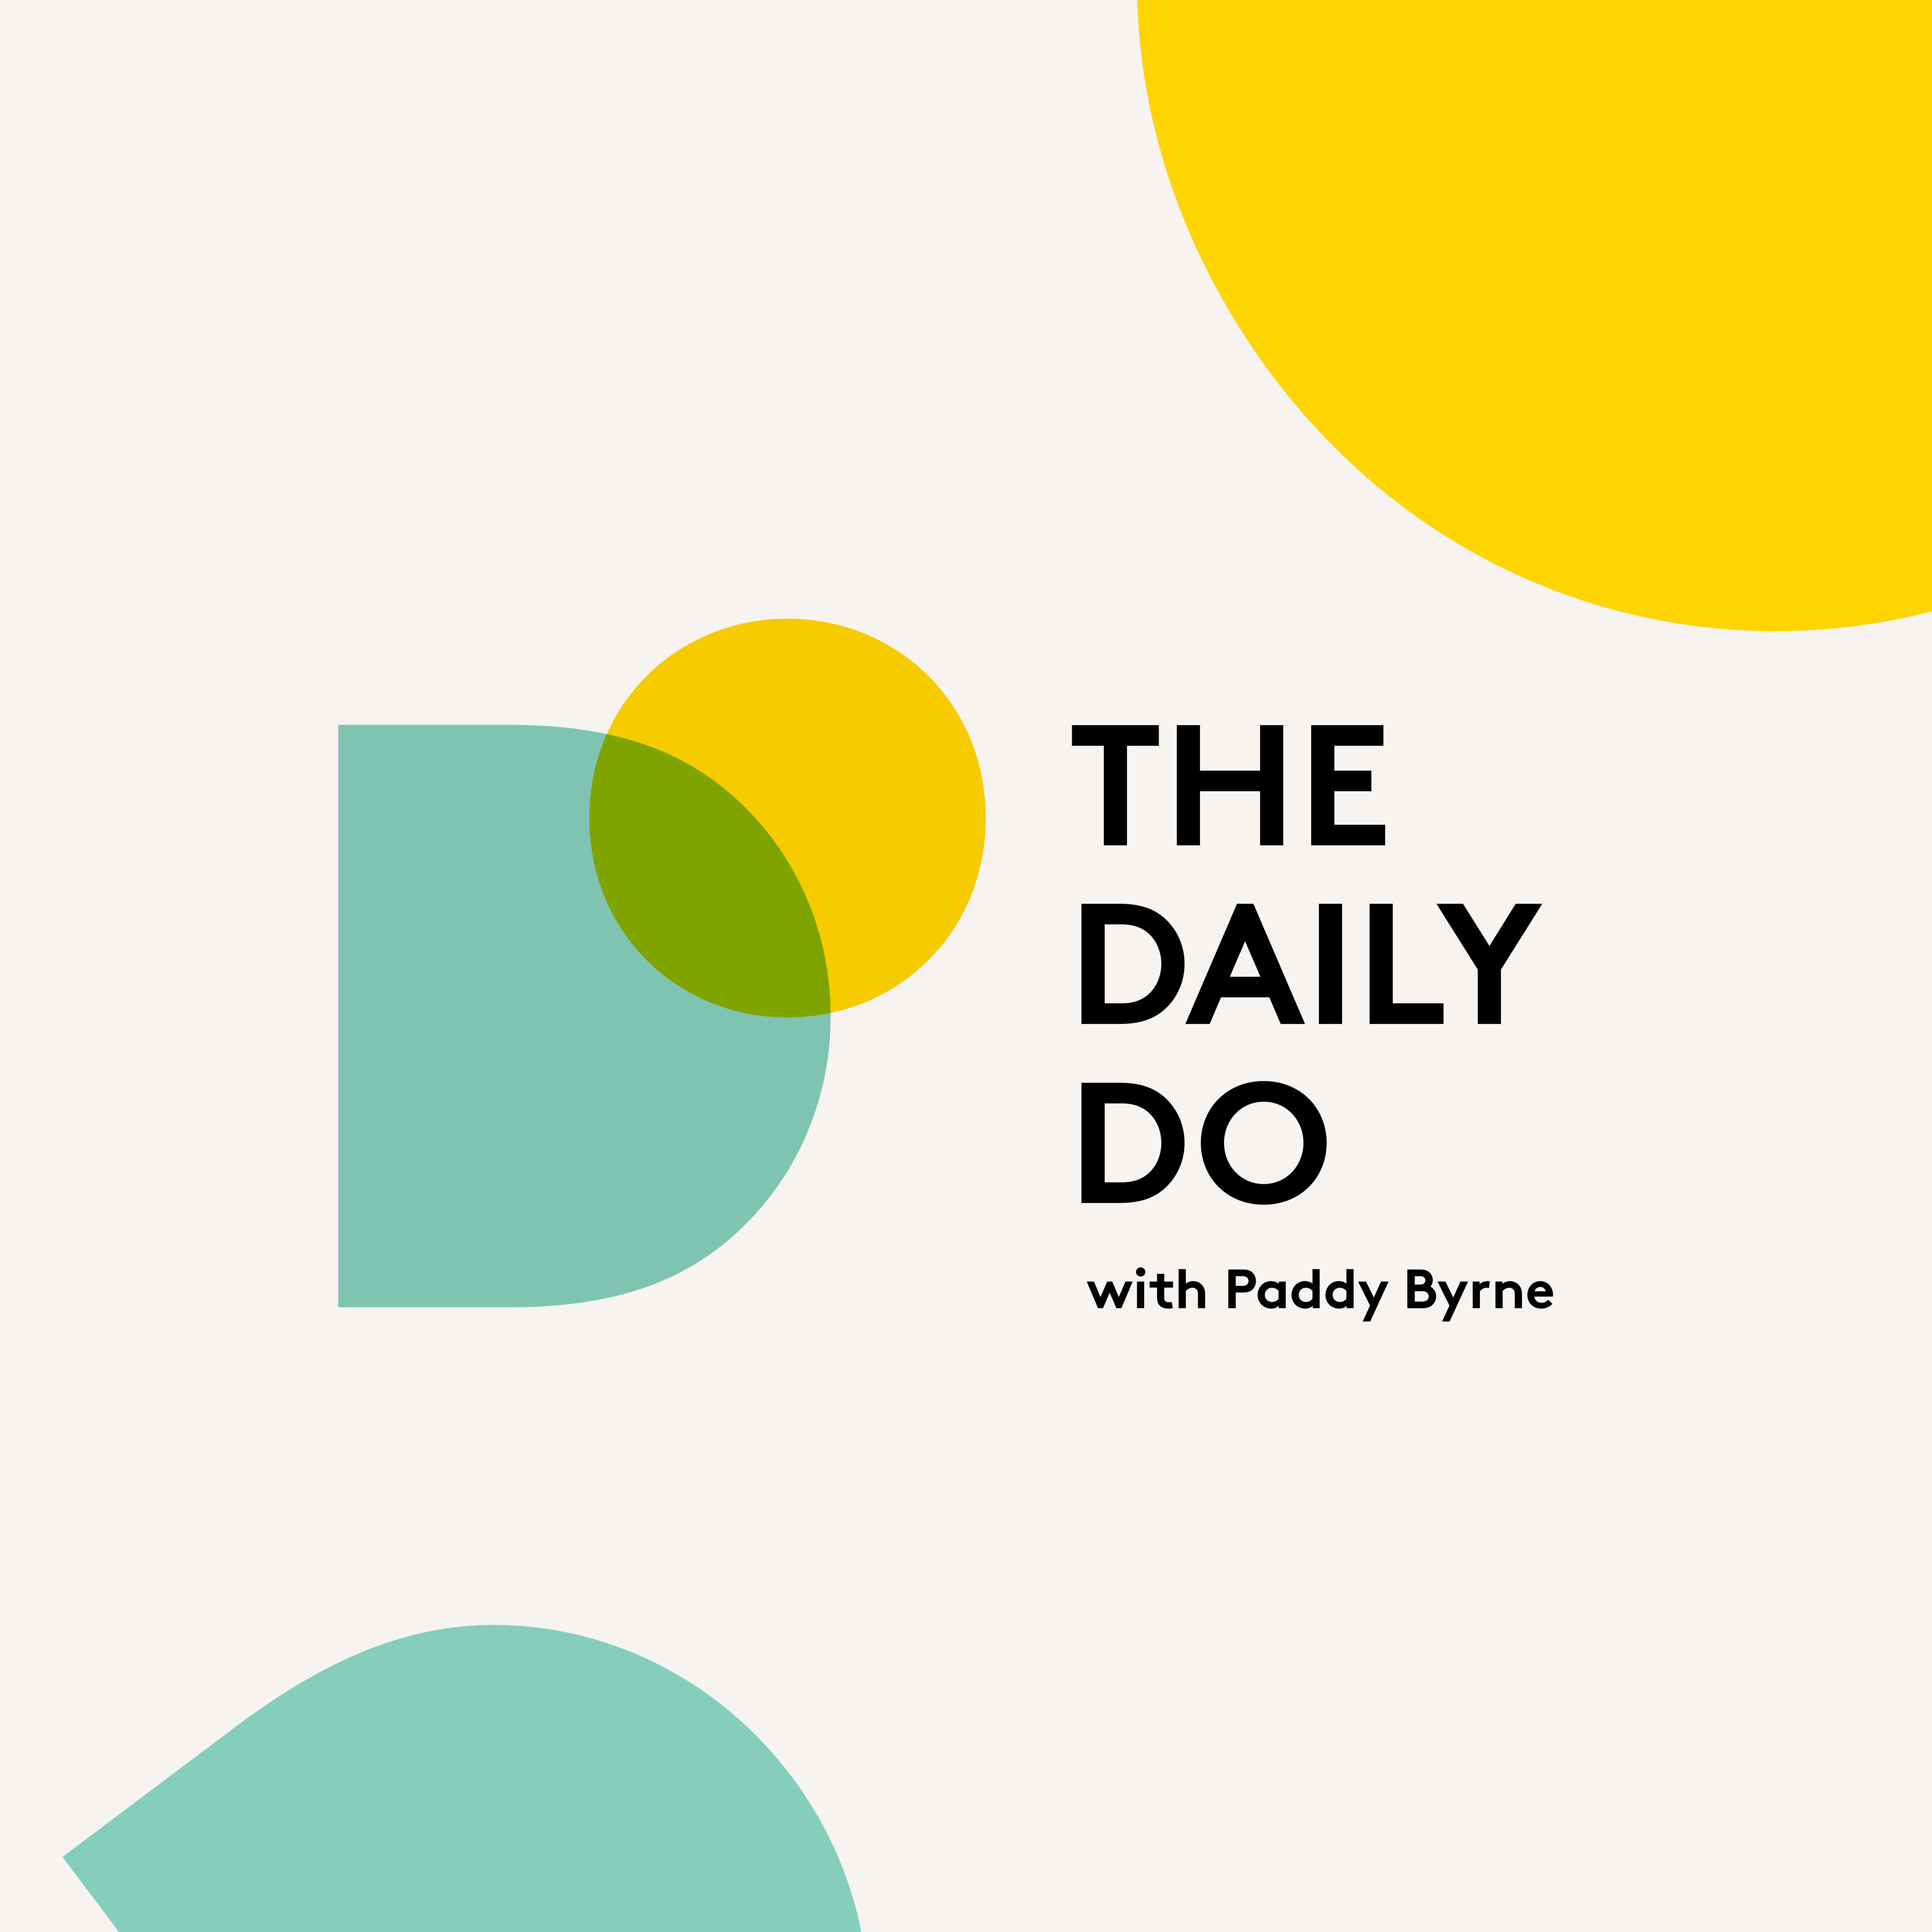 The Daily Do